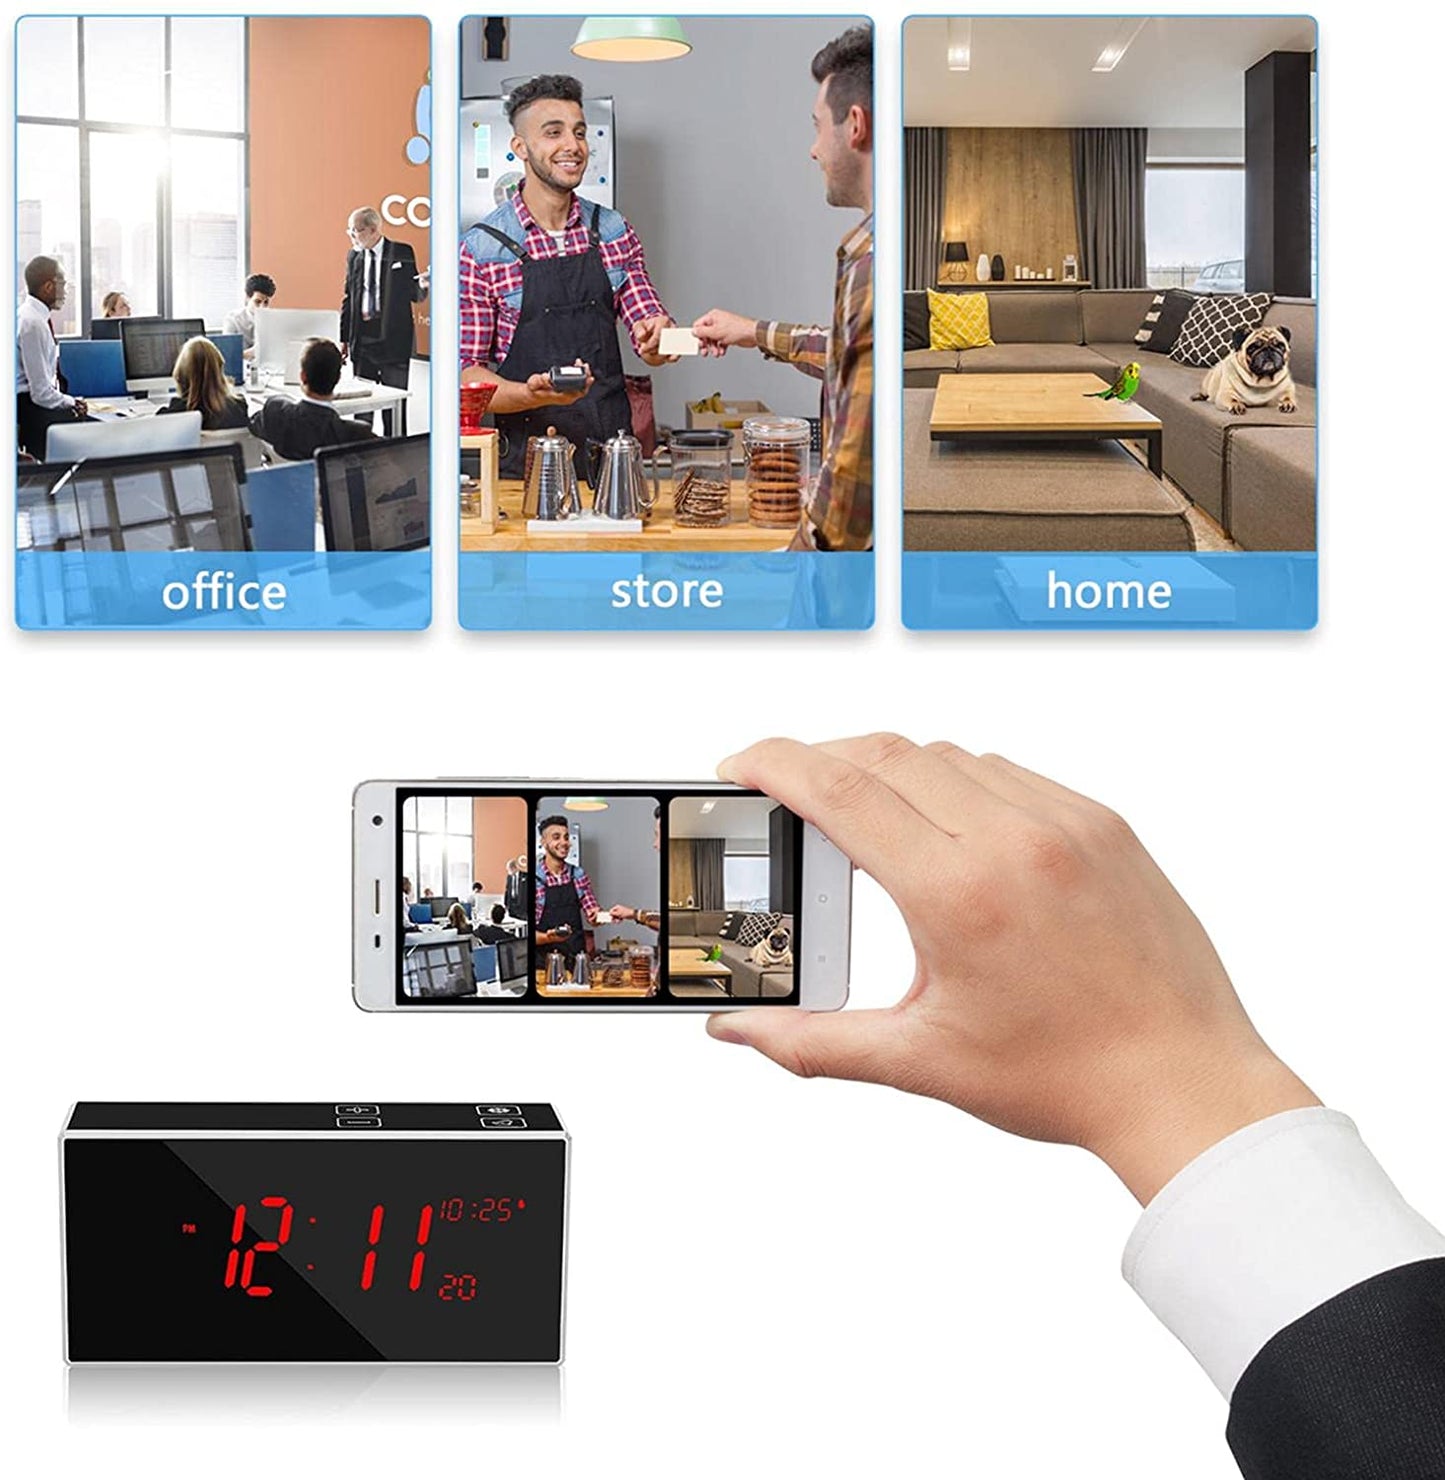 Clock Camera with FAST 5Ghz WiFi Support.